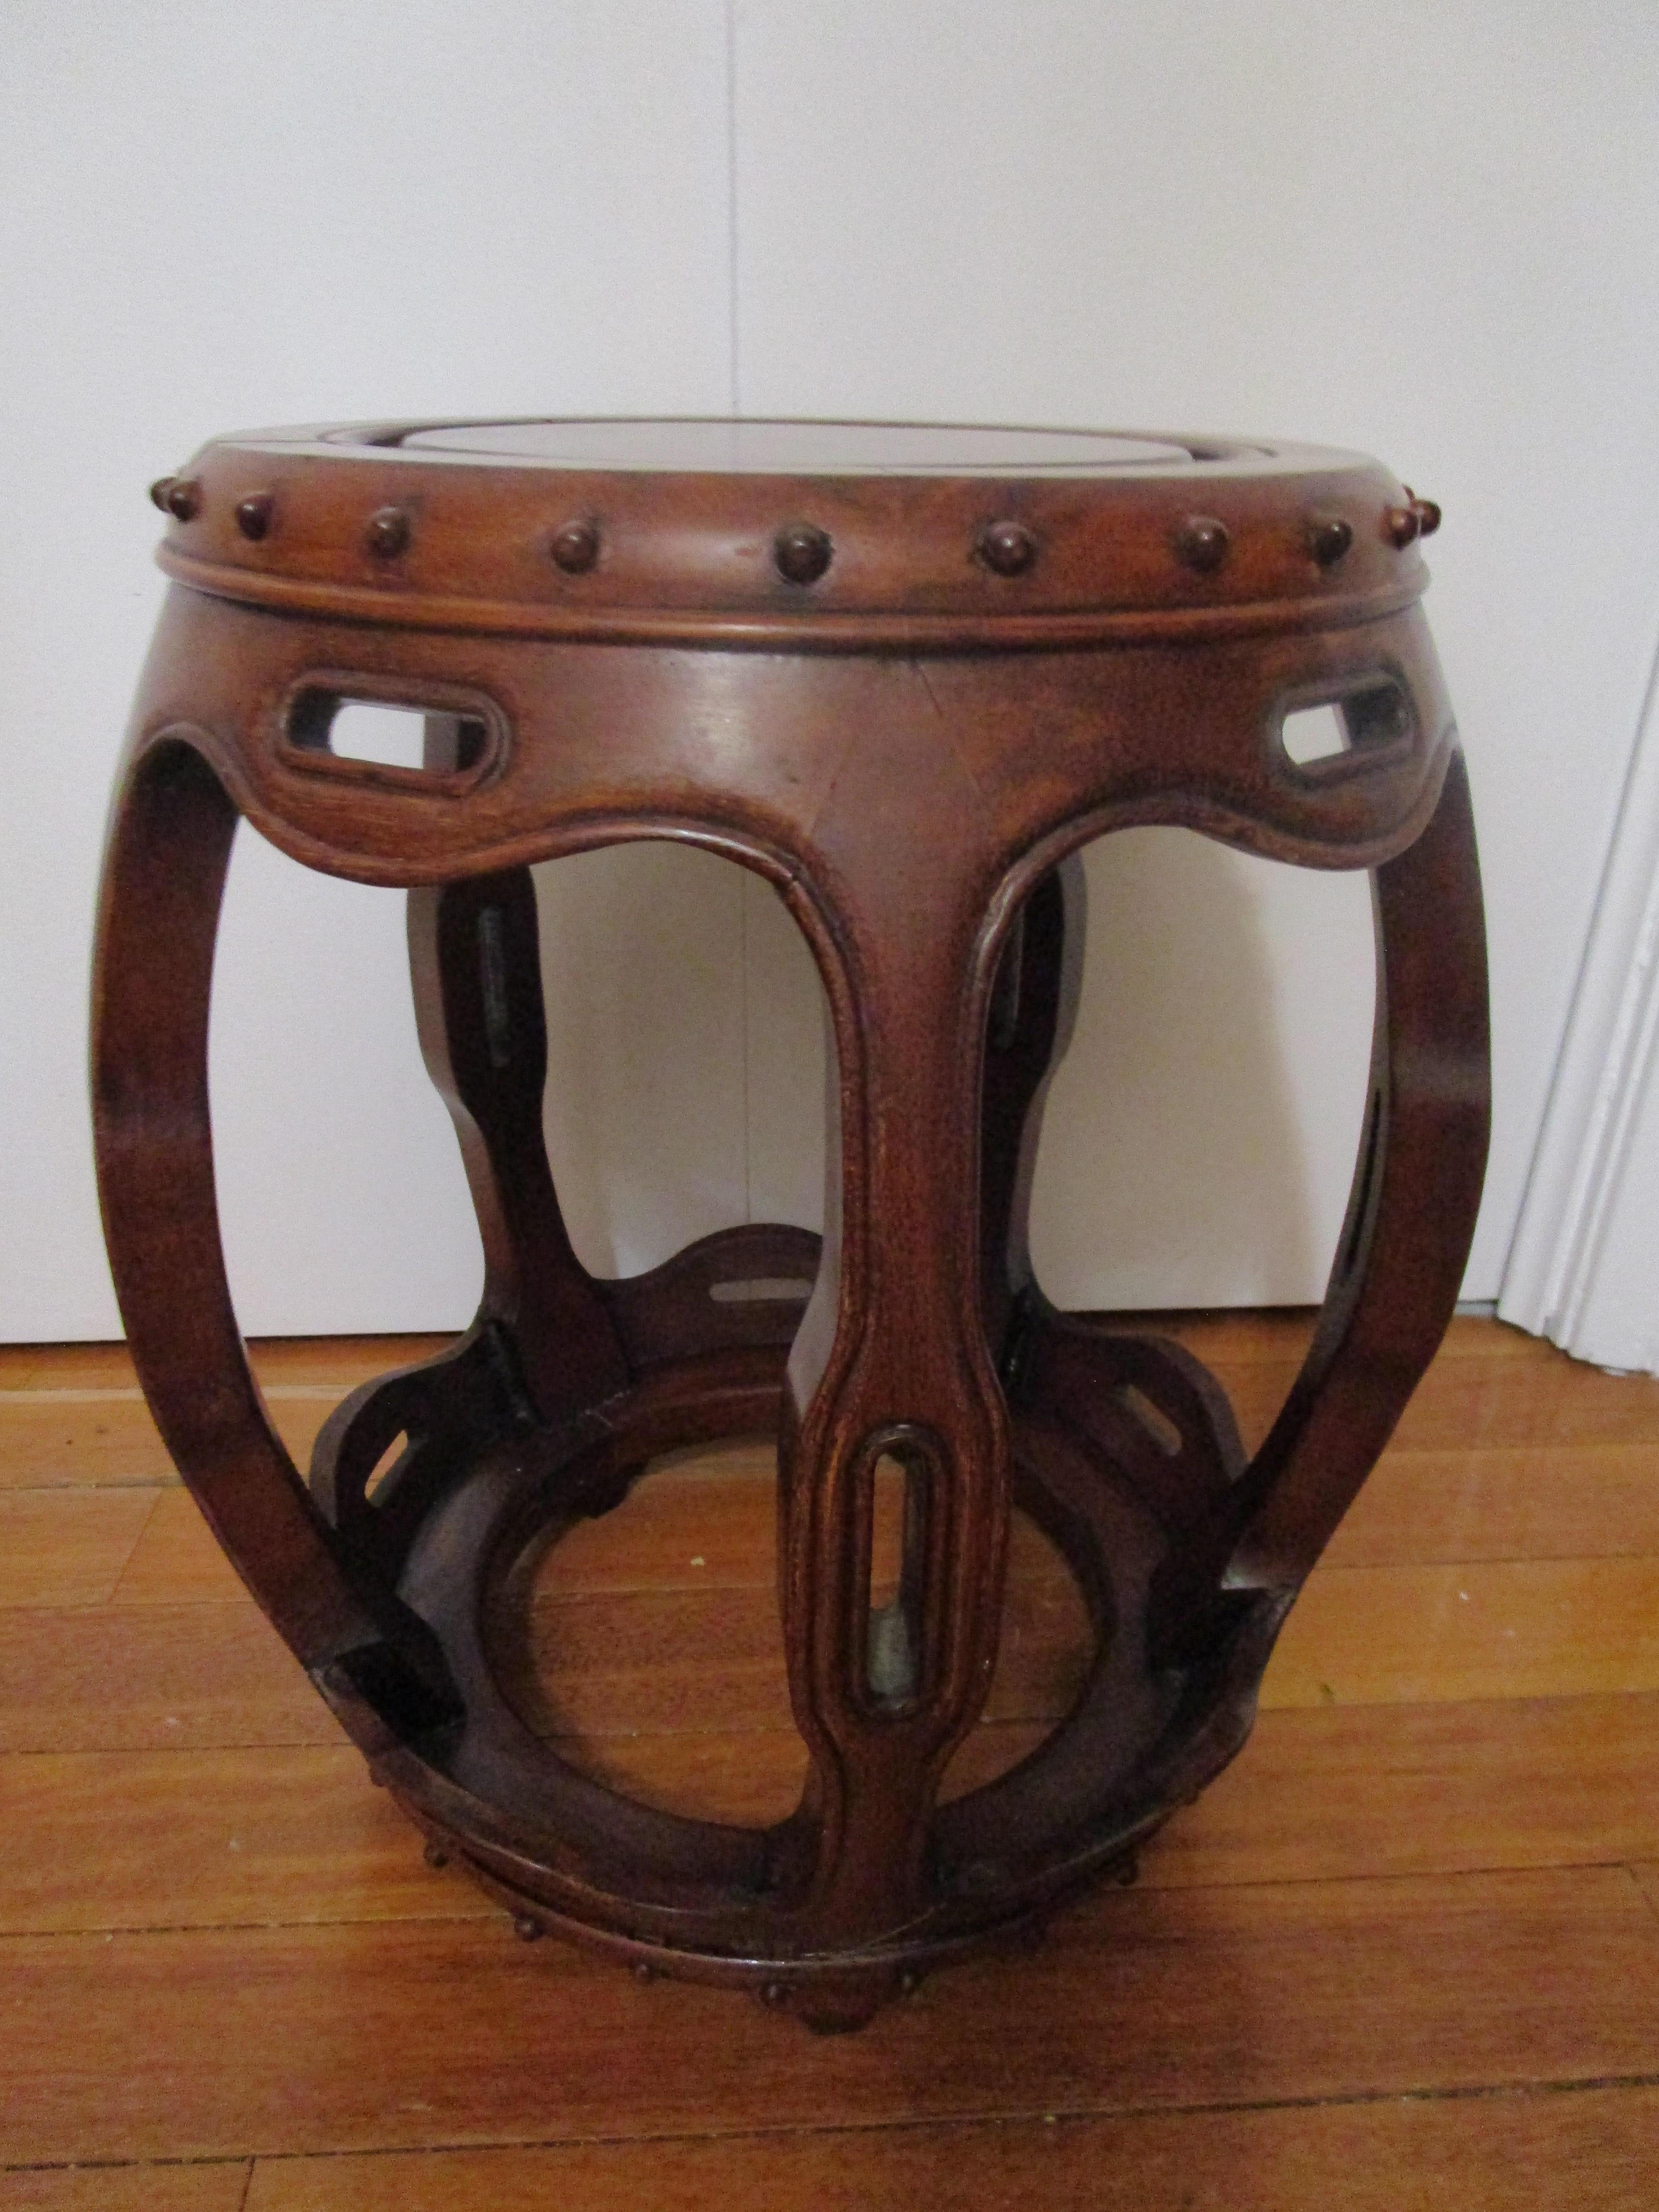 This solo rosewood garden seat has the most beautiful patina with red undertones. This Chinese rosewood barrel shaped garden seat is in the Ming style but  mid-century production. It is sturdy and beautiful with a rich patina.
There is a raised